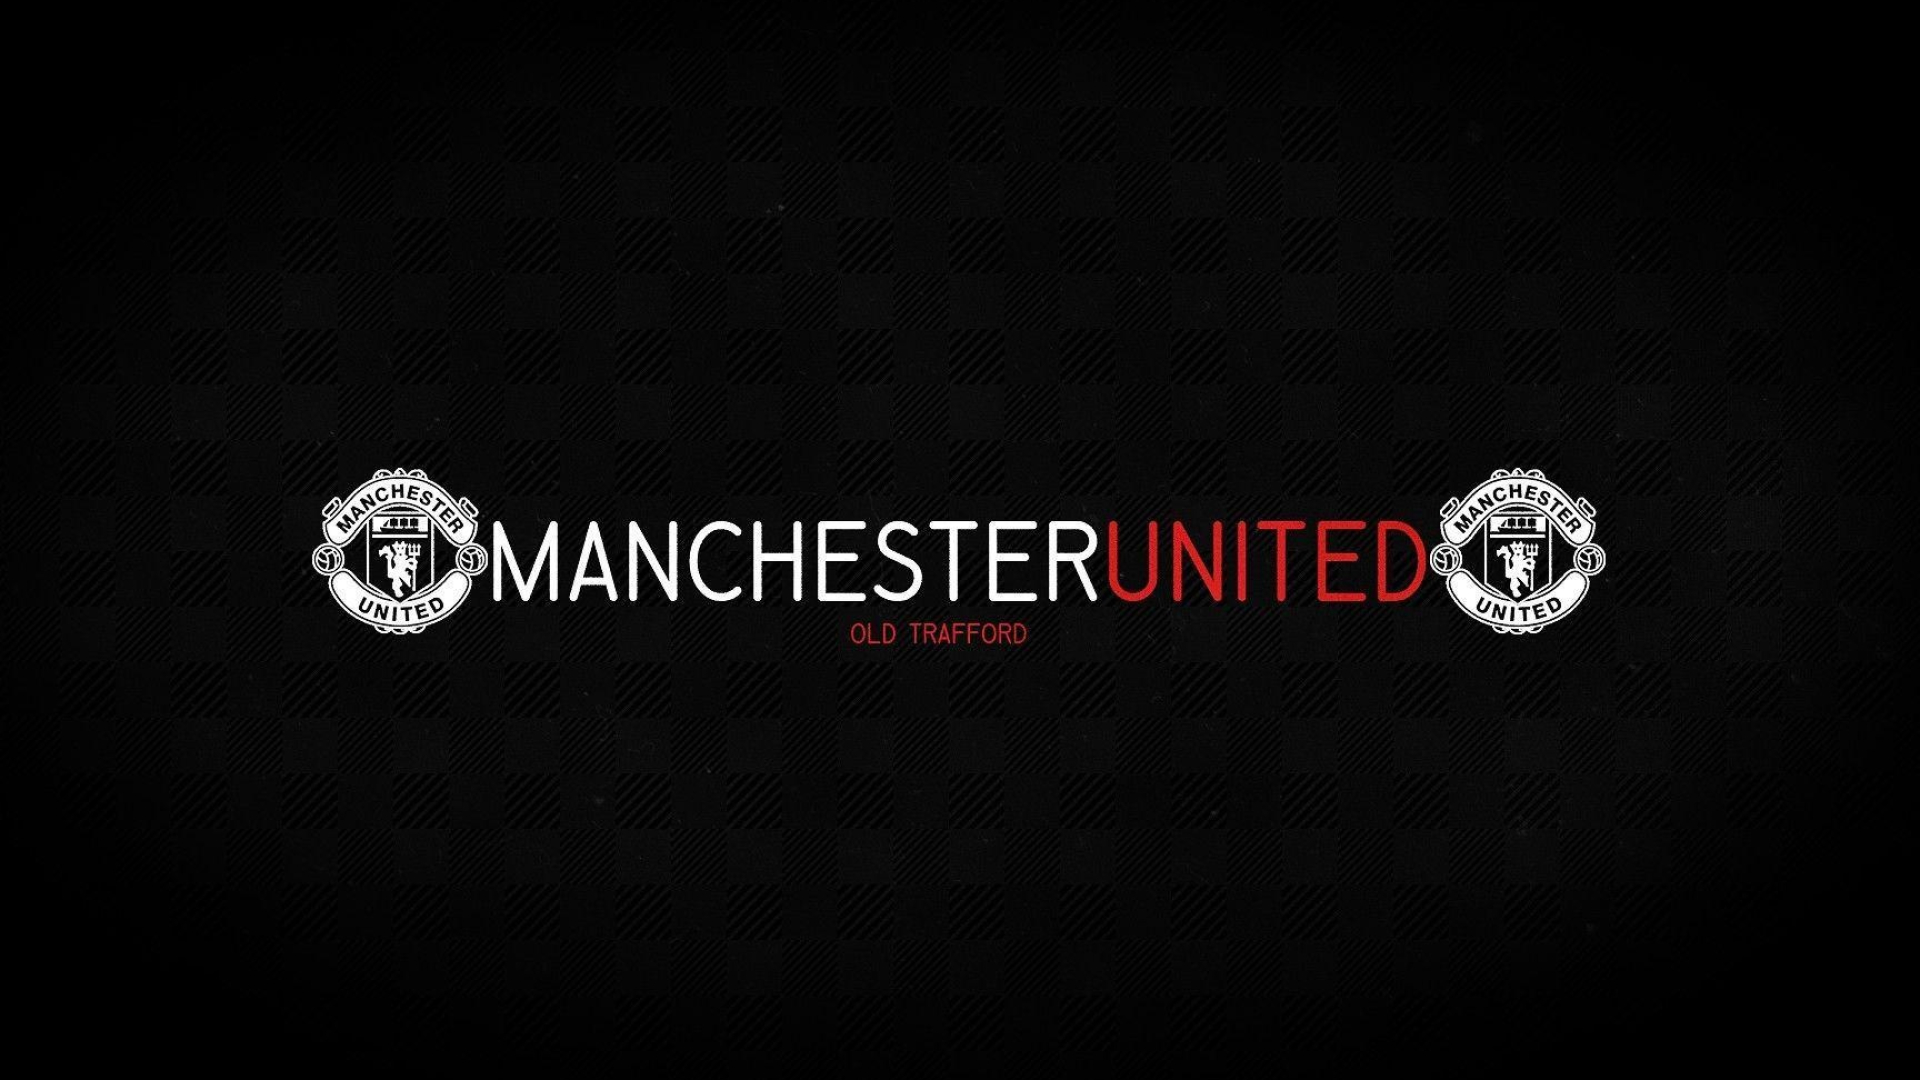 Manchester United: The club became the only British team to ever win the Intercontinental Cup. 1920x1080 Full HD Wallpaper.